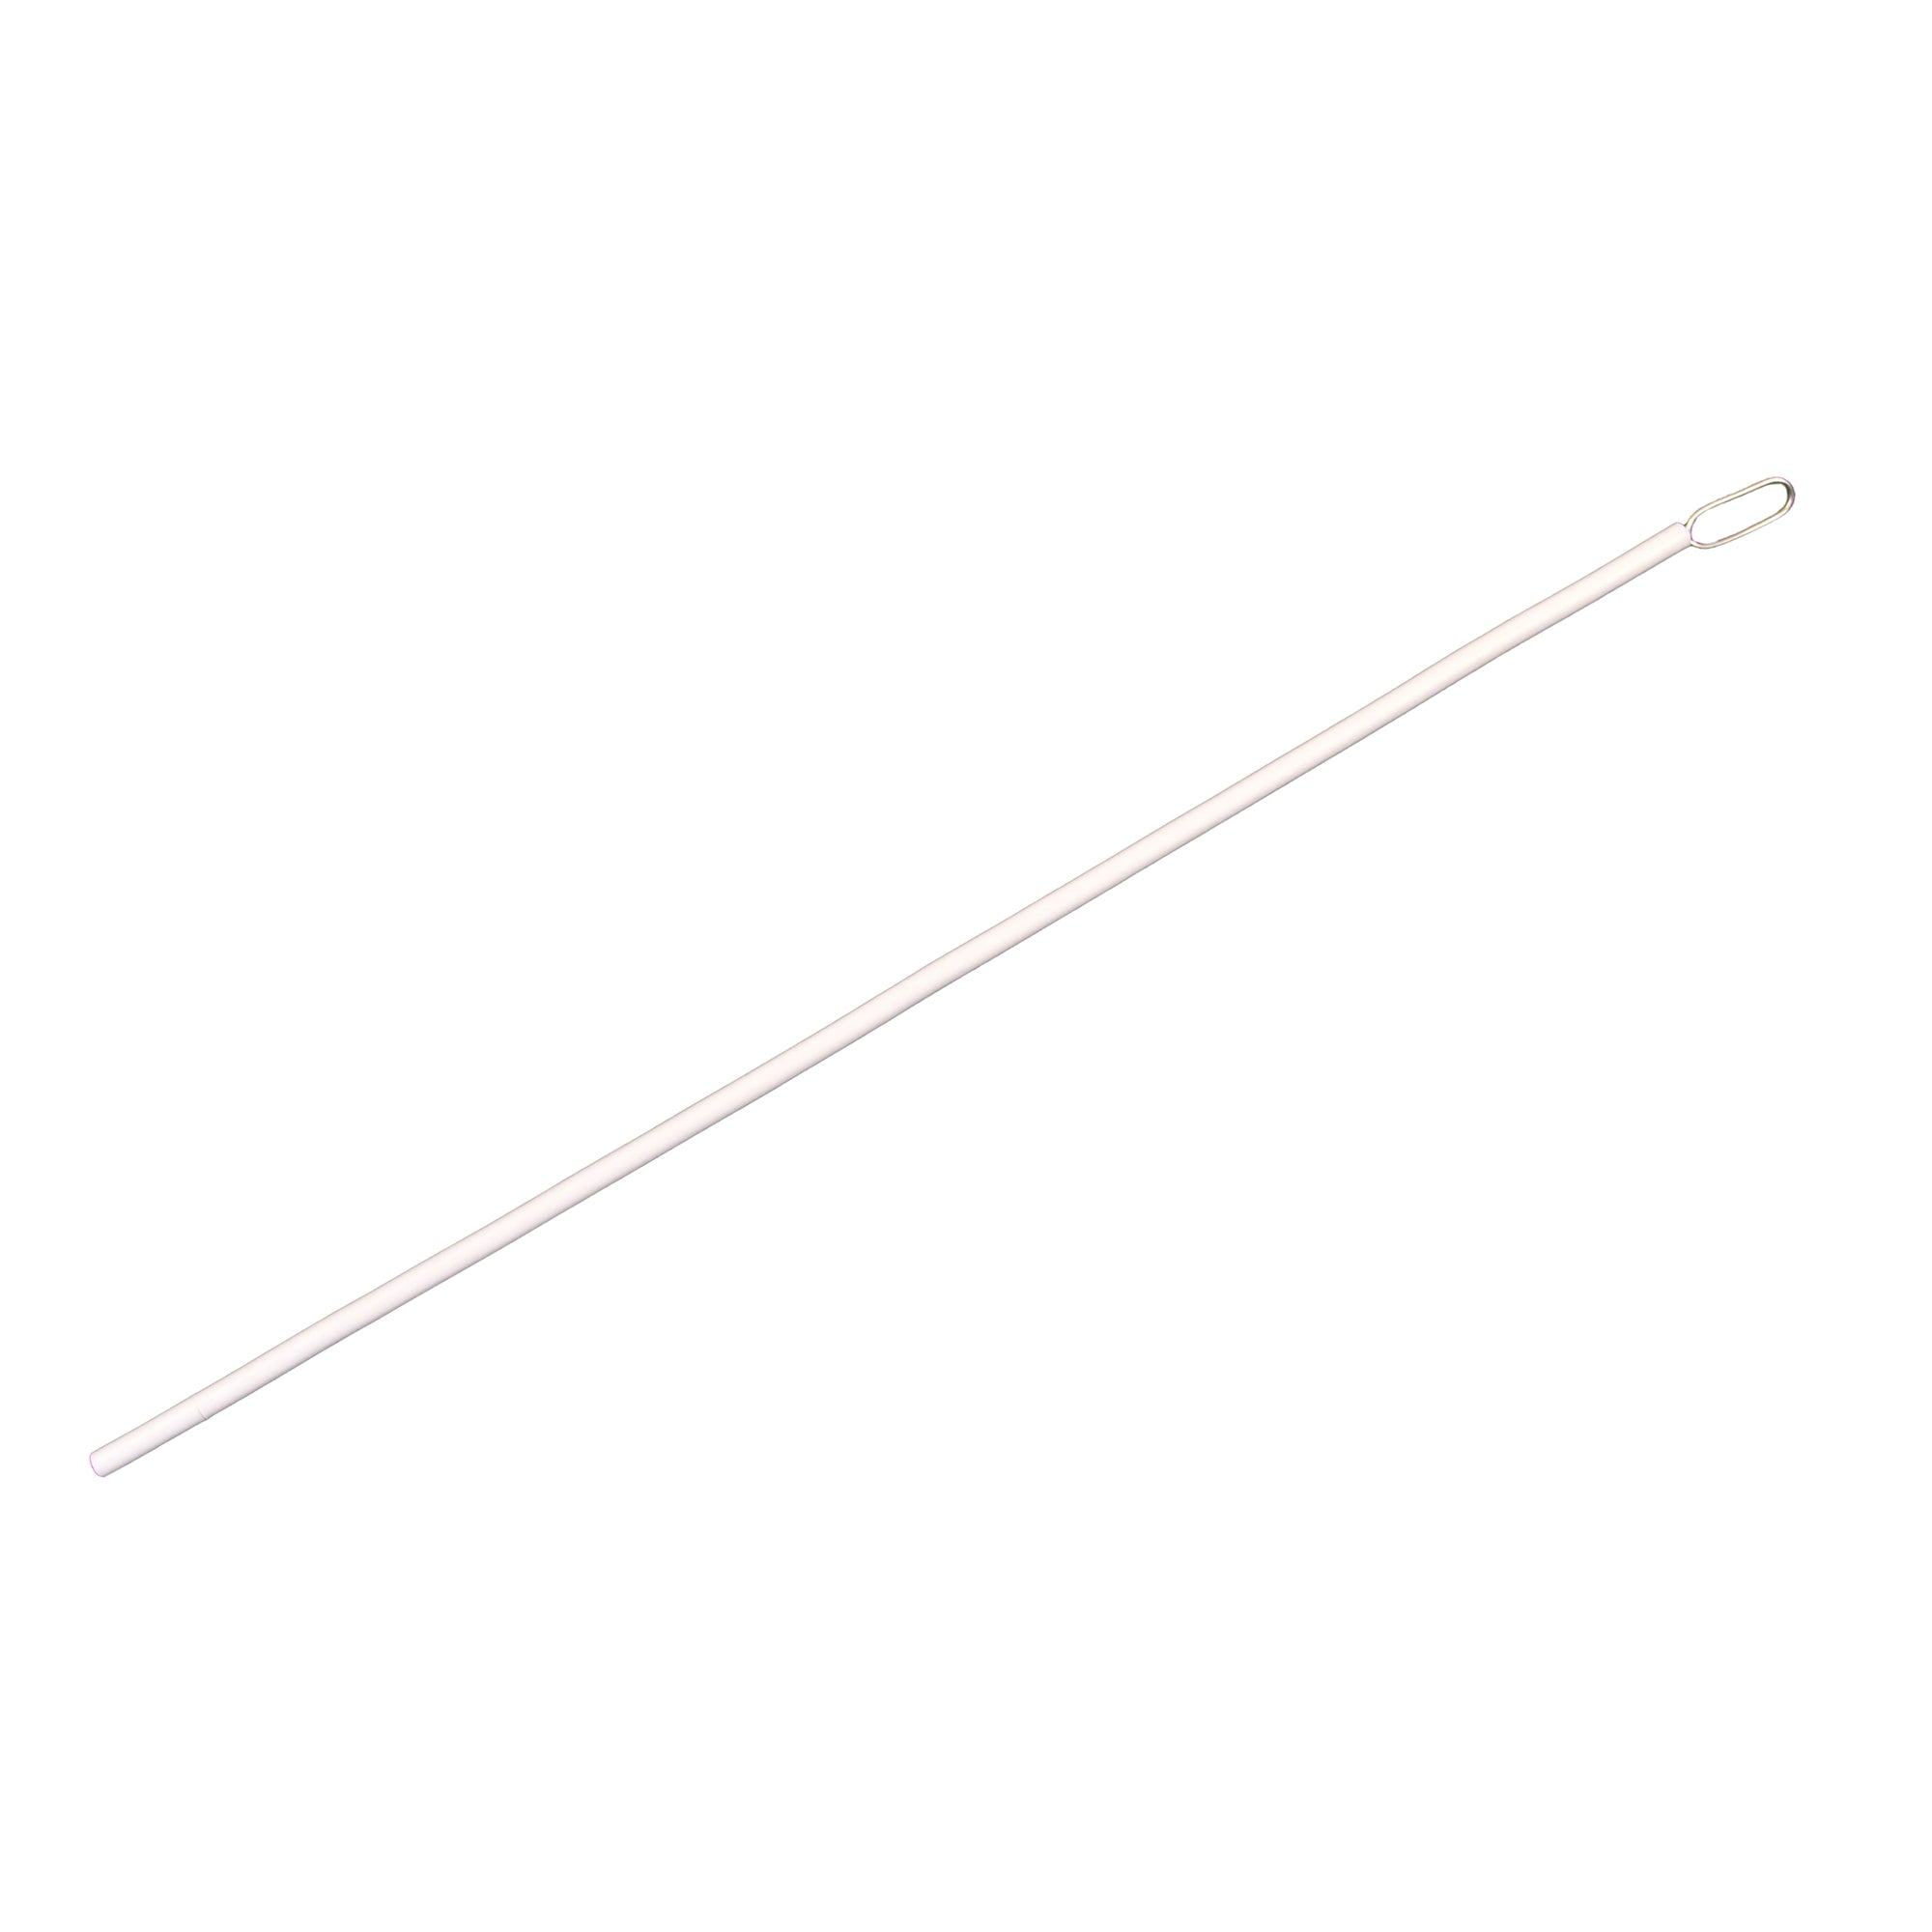 MISC CRFL Flute Rod Synthetic